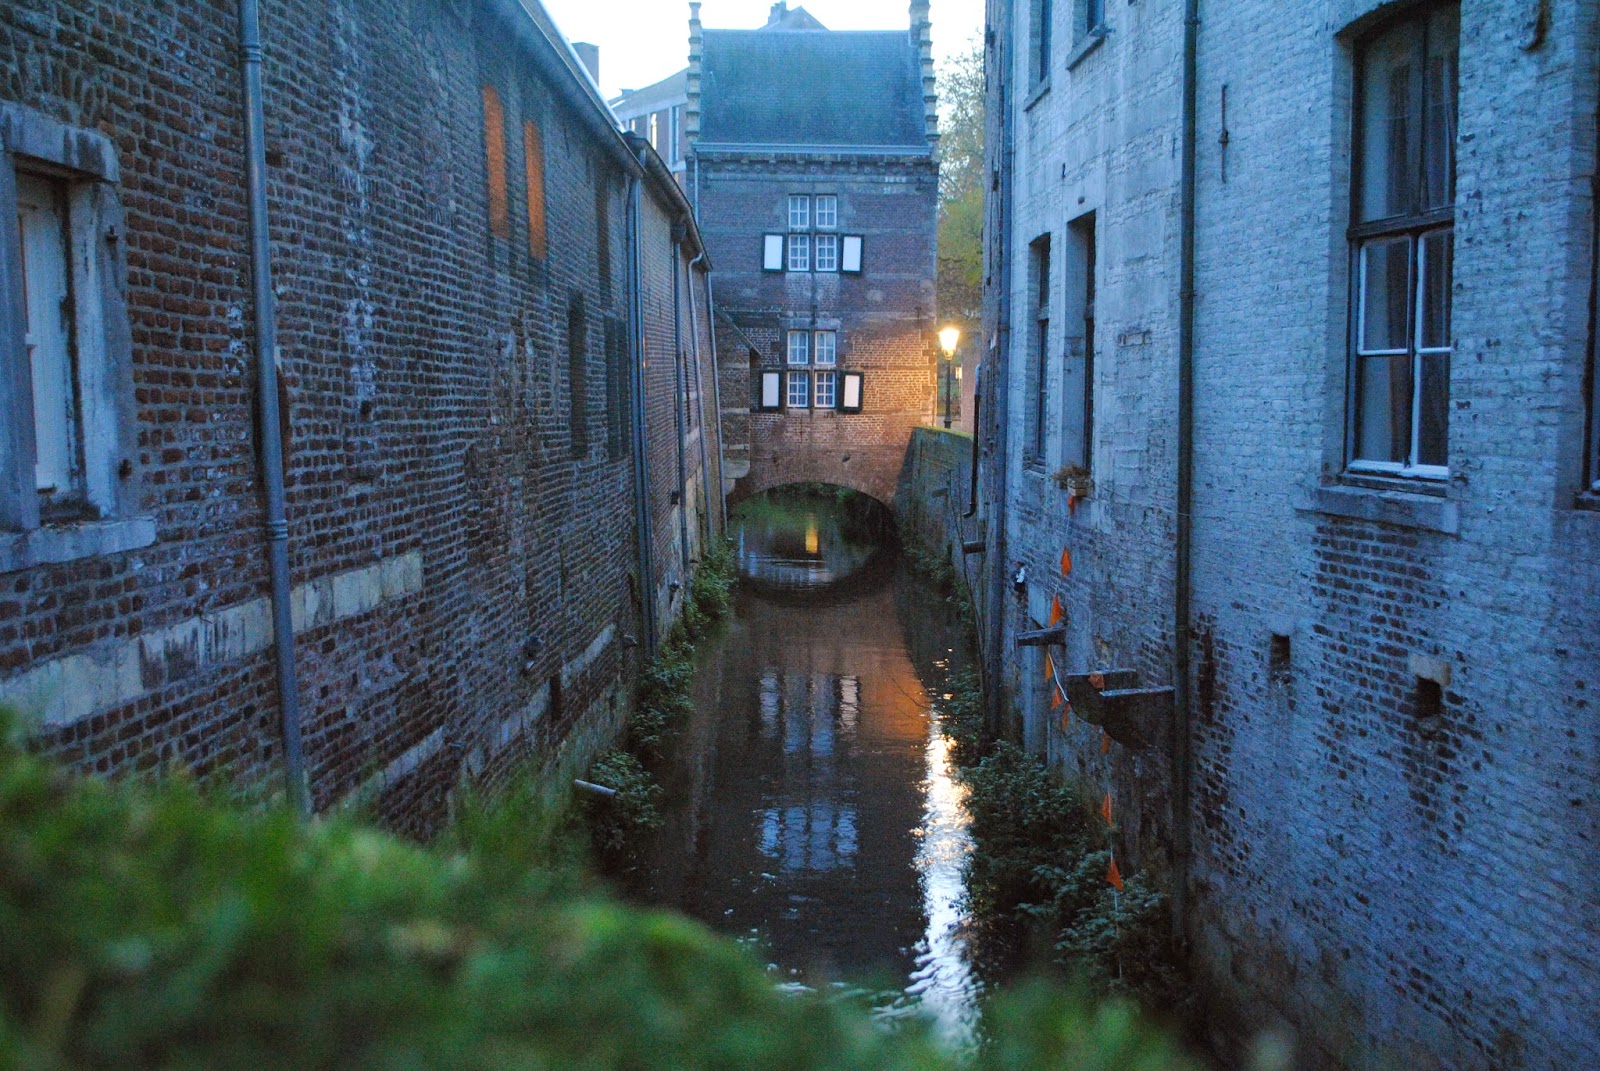 An evening photo of a canal in Maastricht, Netherlands.